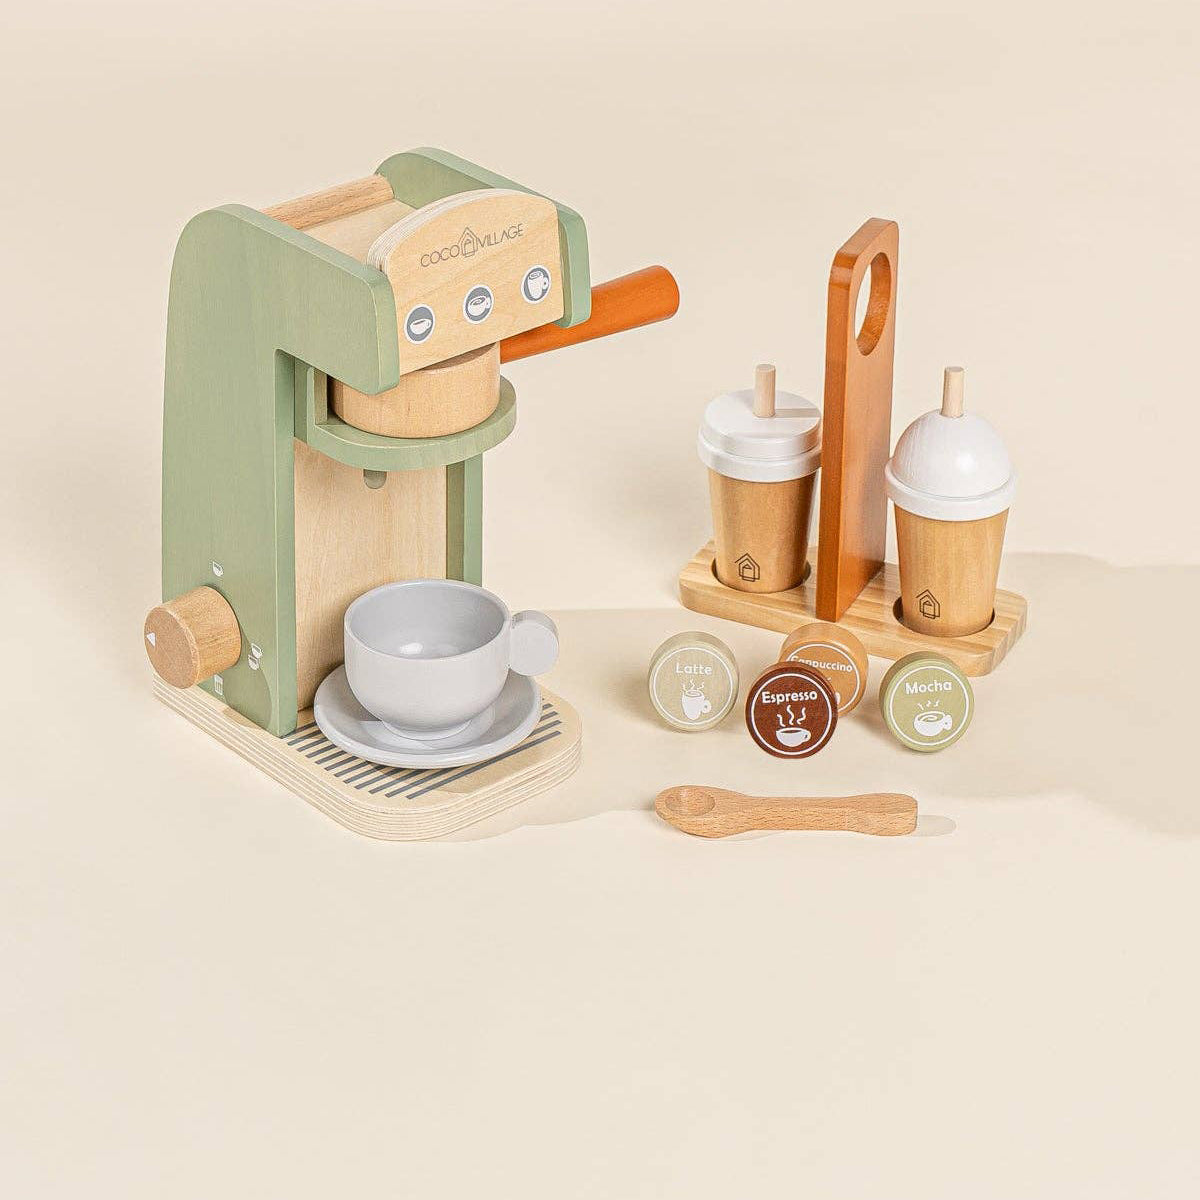 Wooden Coffee Maker Play Set